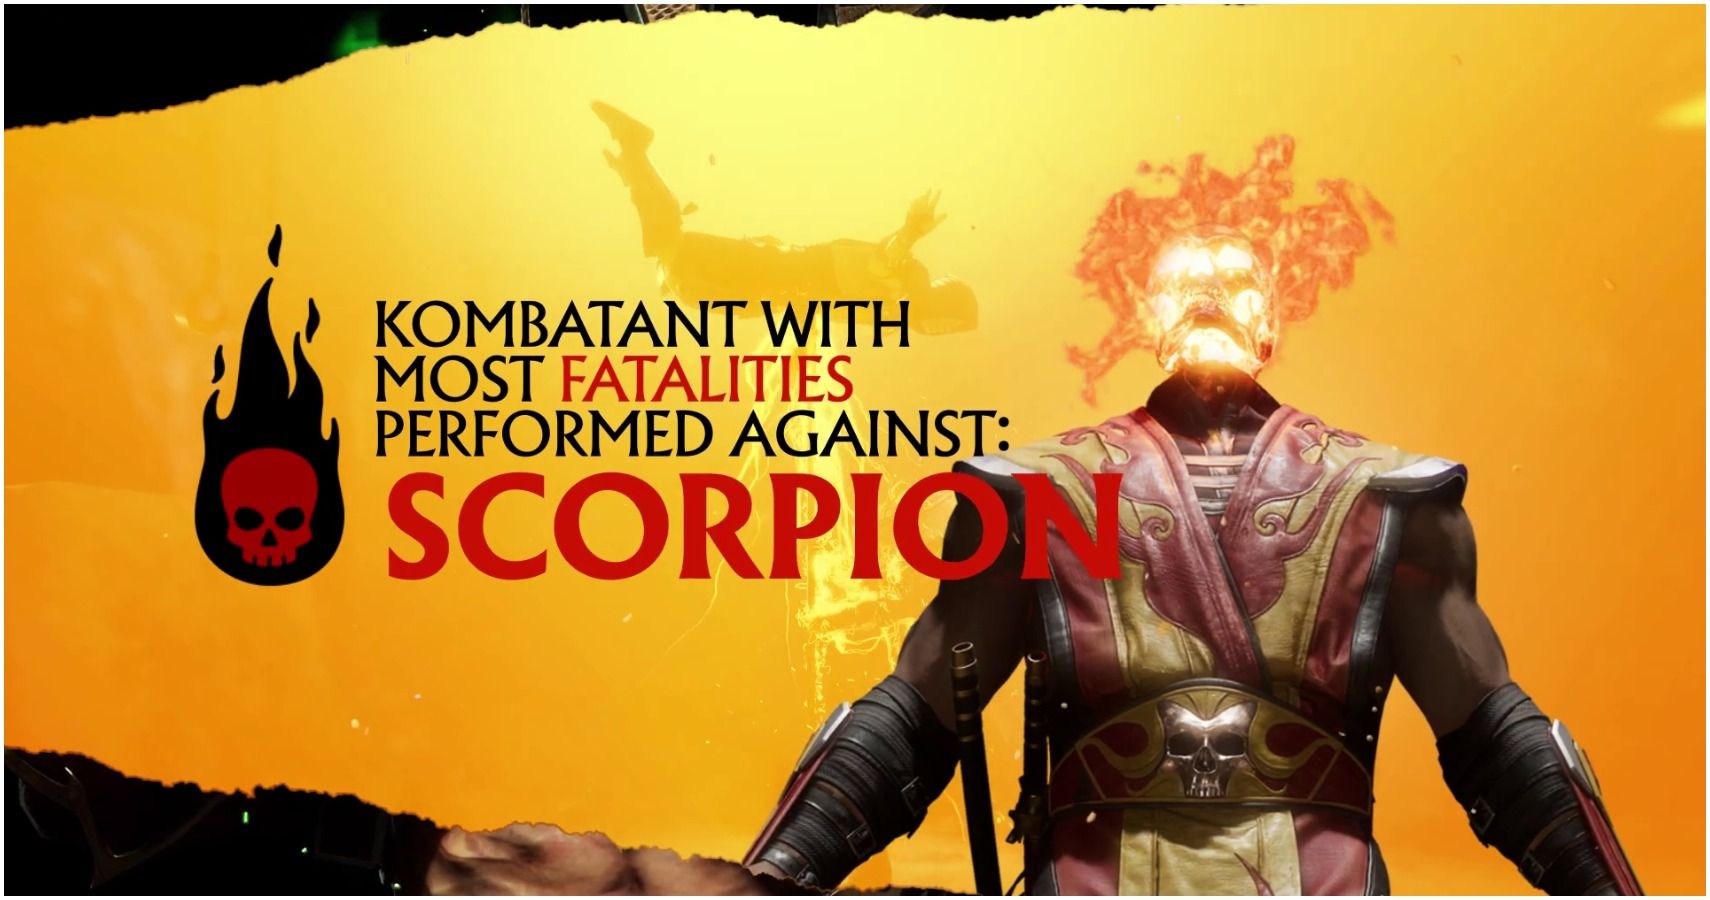 Mortal Kombat 11 Scorpion Has Won The Most And Suffered The Most Fatalities